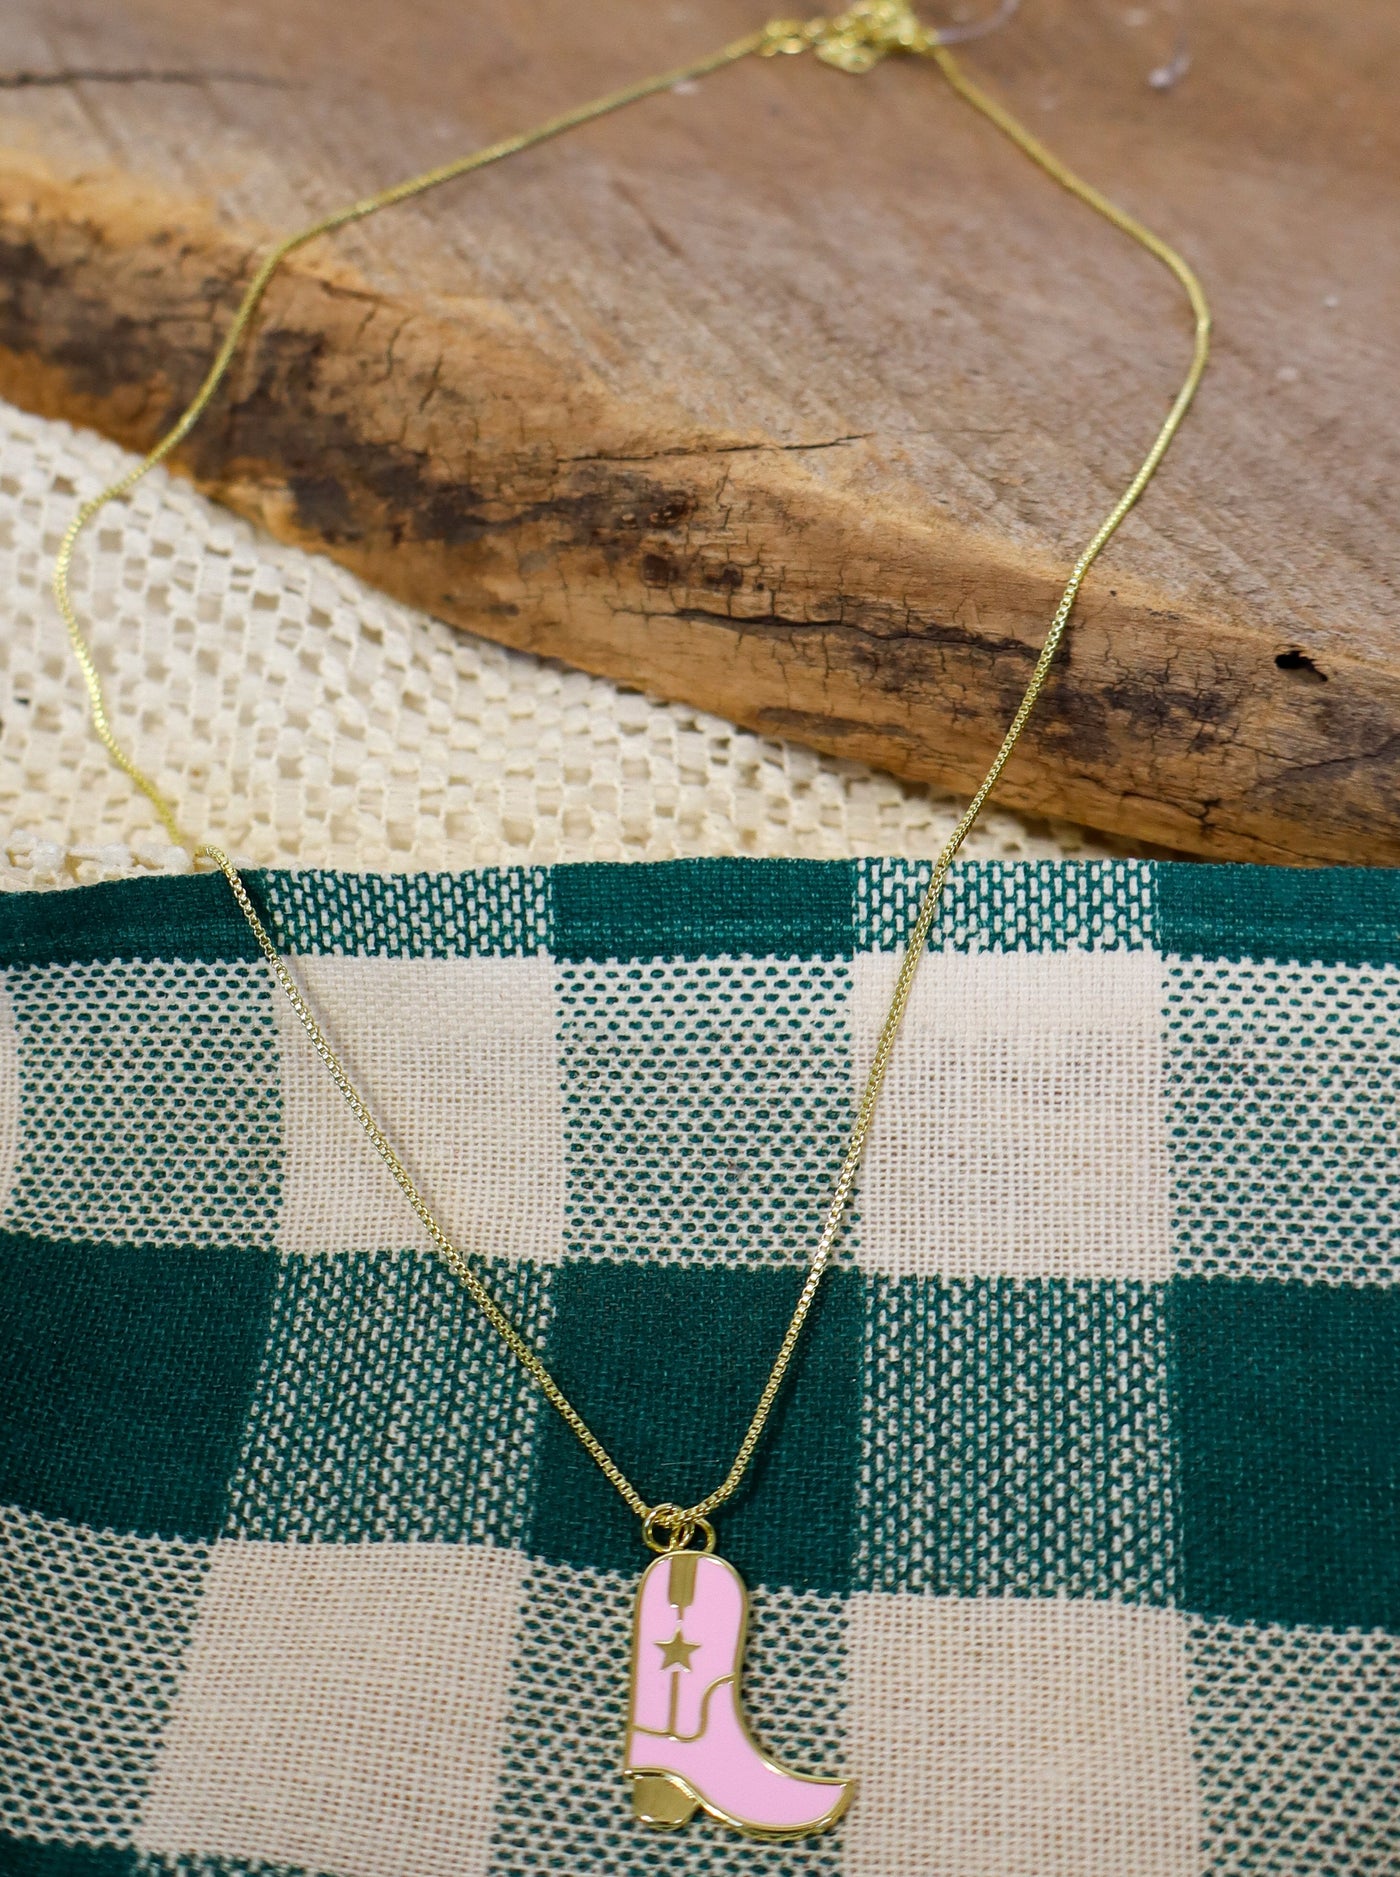 Pink and gold cowboy boot chain necklace